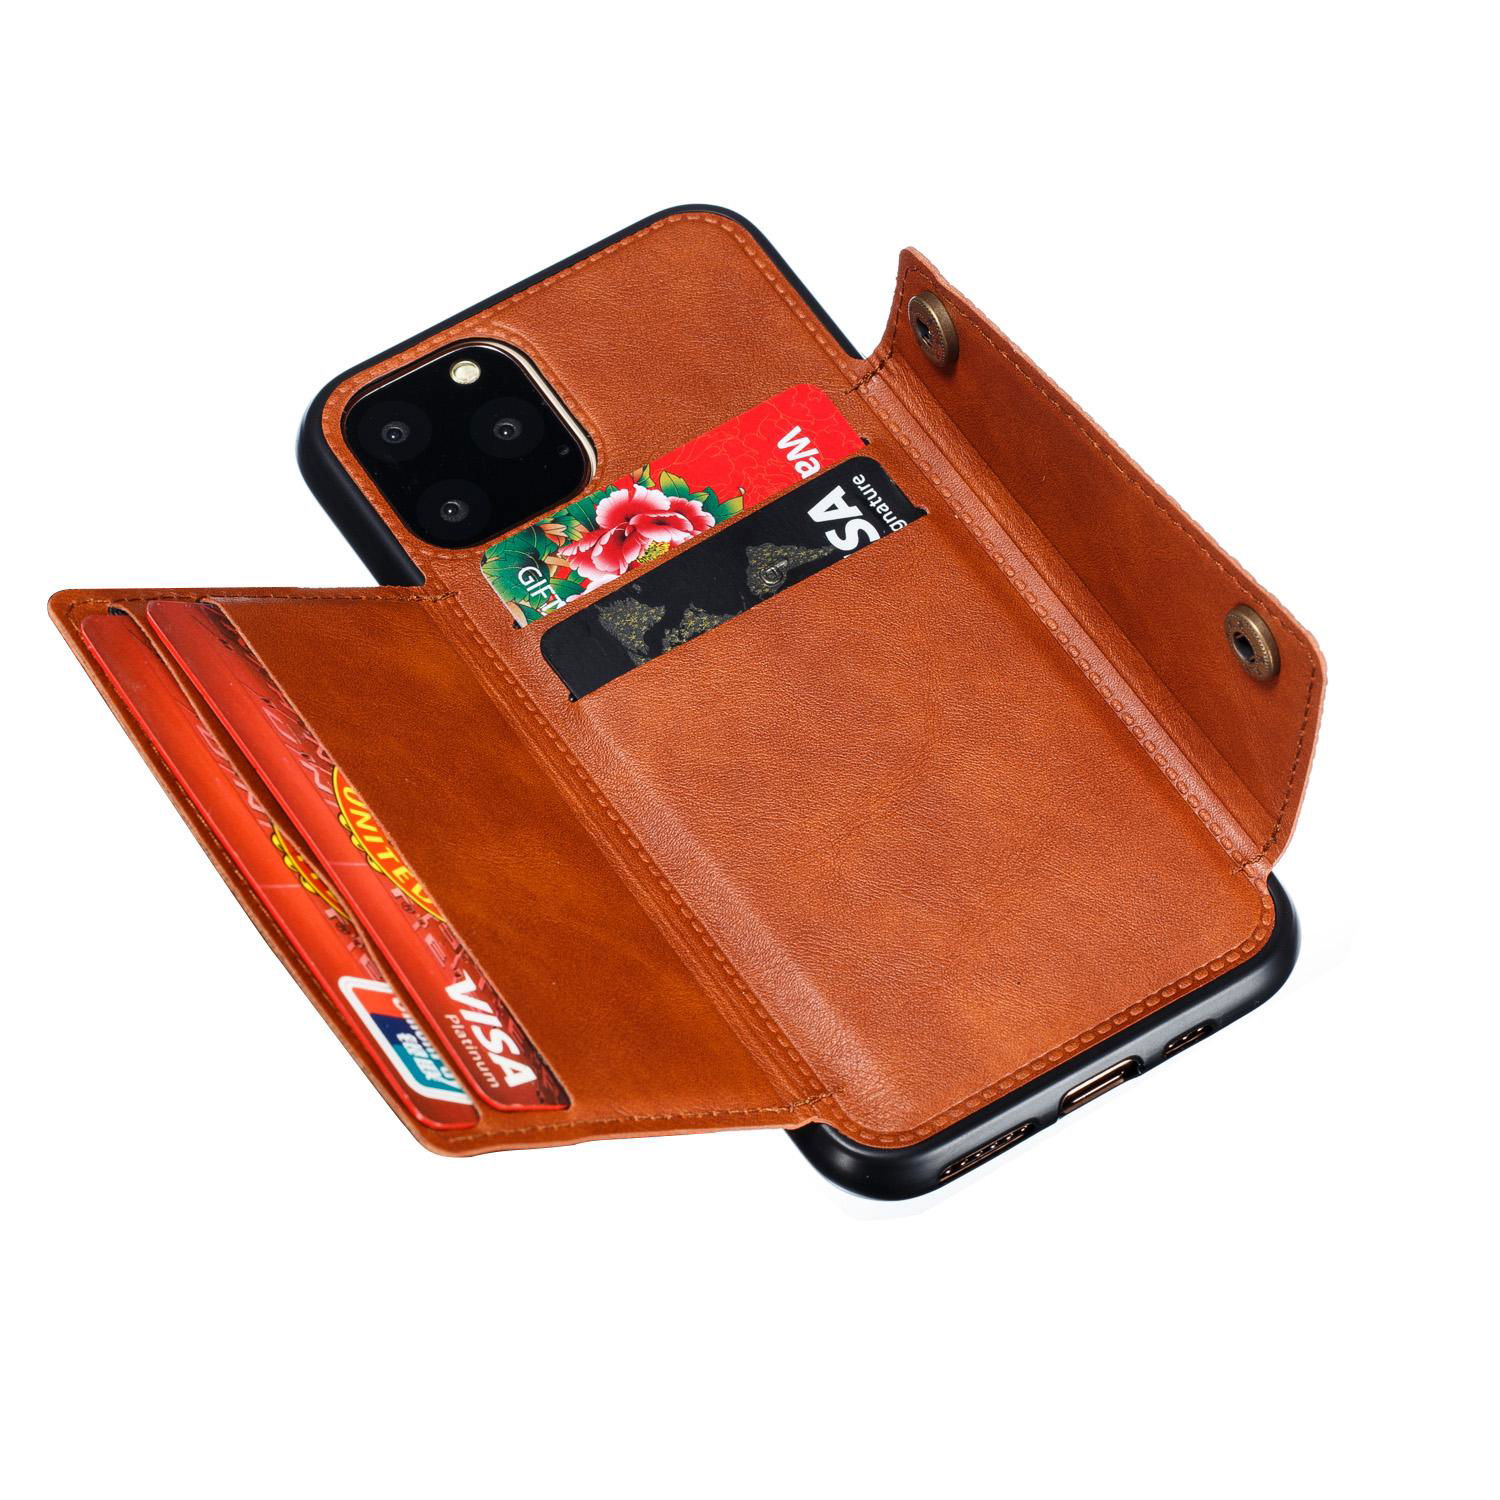 Leather Wallet Mobile Phone Bag Cellphone Case for iphone 12 3